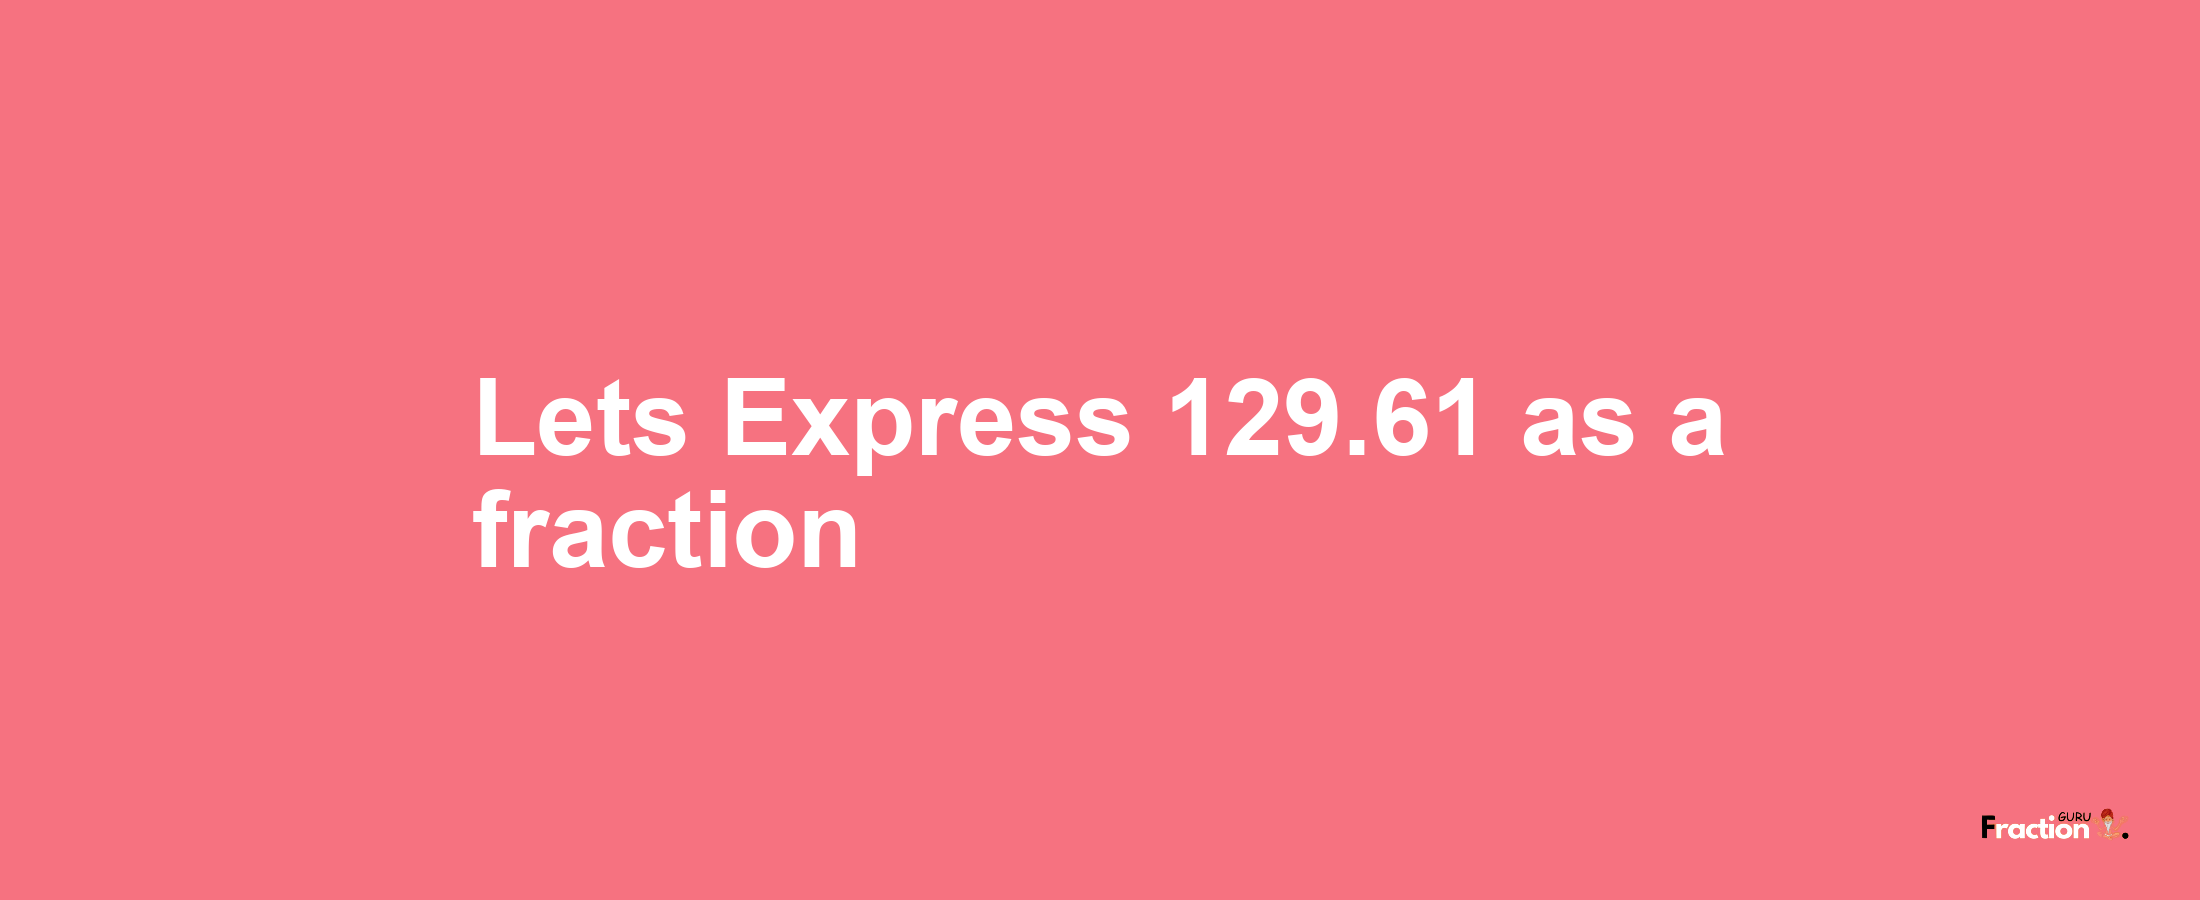 Lets Express 129.61 as afraction